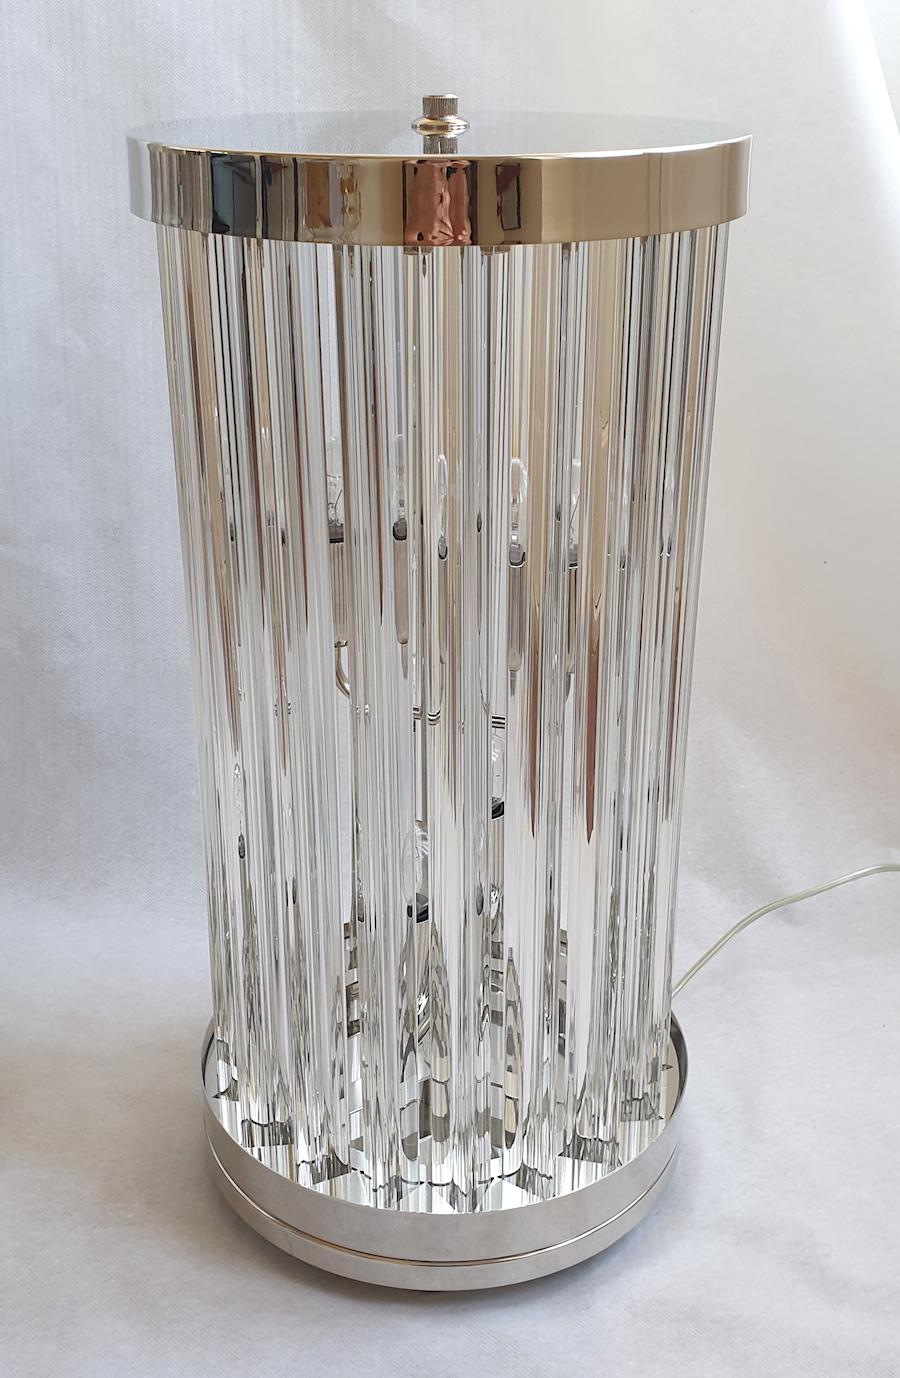 Pair of large vintage Murano glass and nickel plated lamps, by Venini, Italy, 1980s.
The Mid-Century Modern lamps are made of clear 